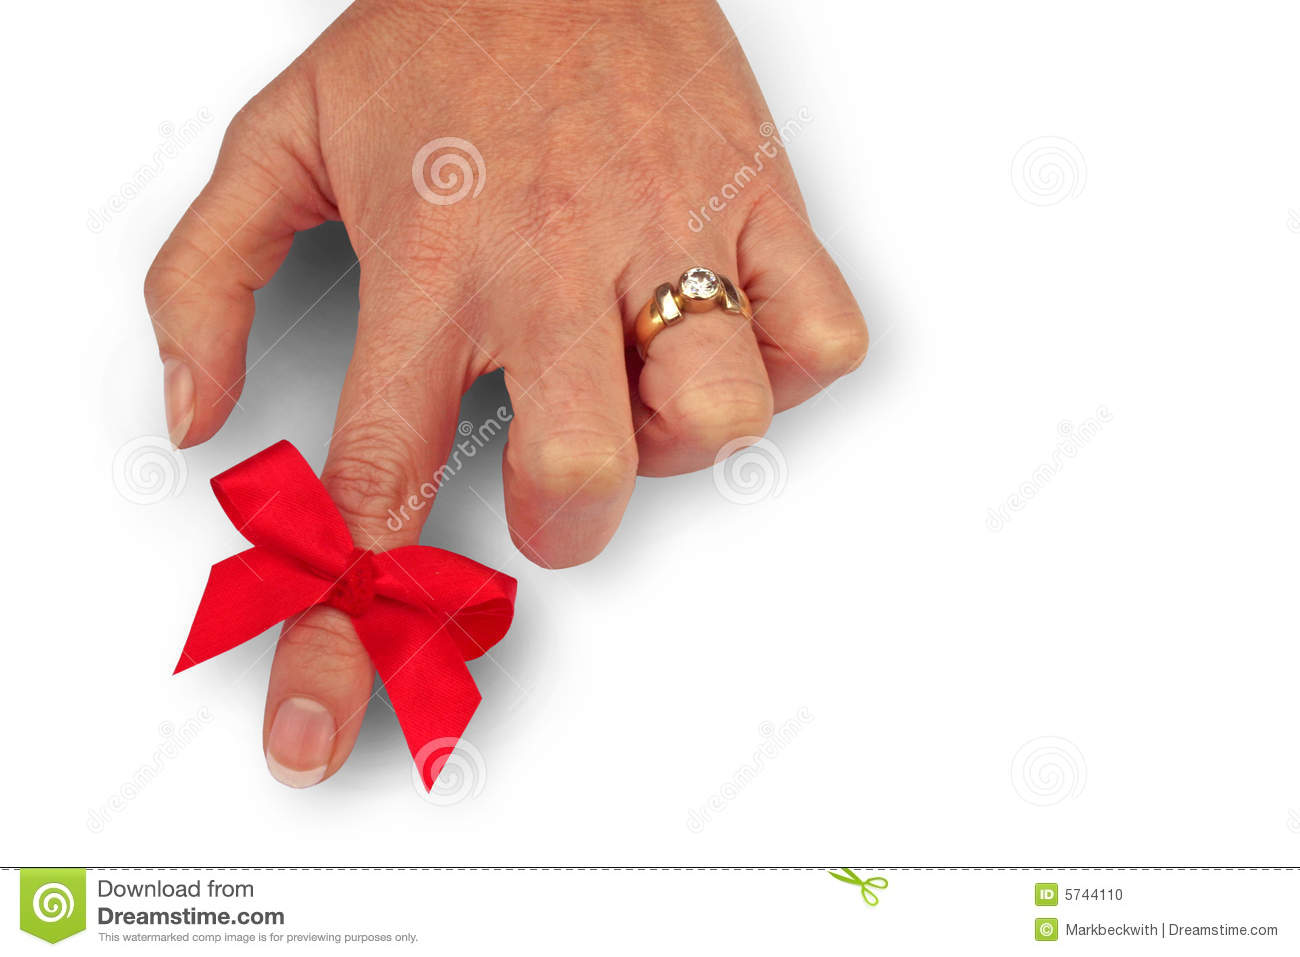 Red Ribbon Tied Around Index Finger As A Reminder